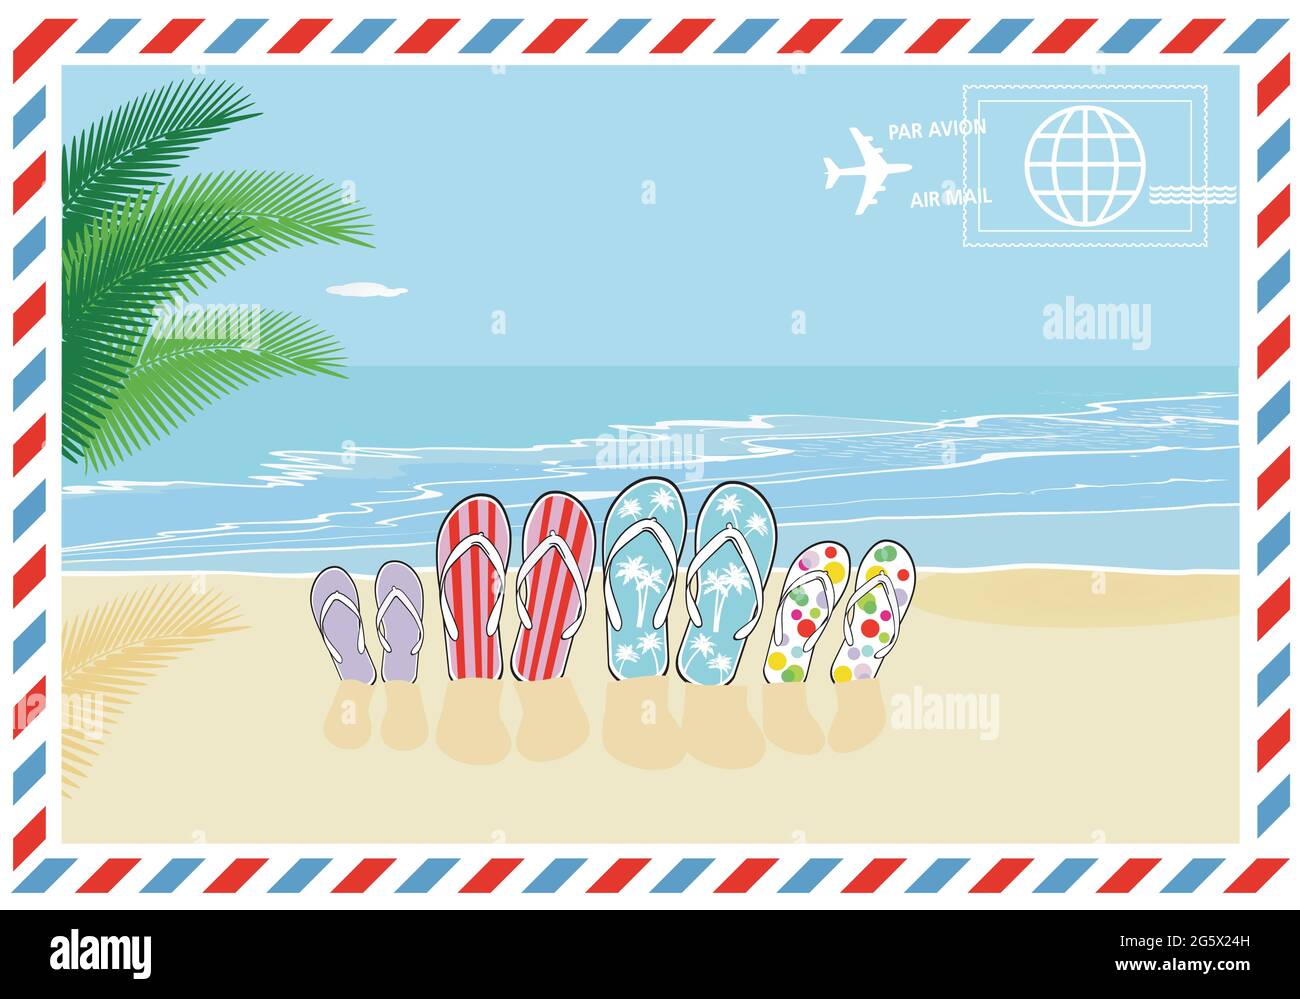 Vacation and travel, greetings from the family Stock Vector